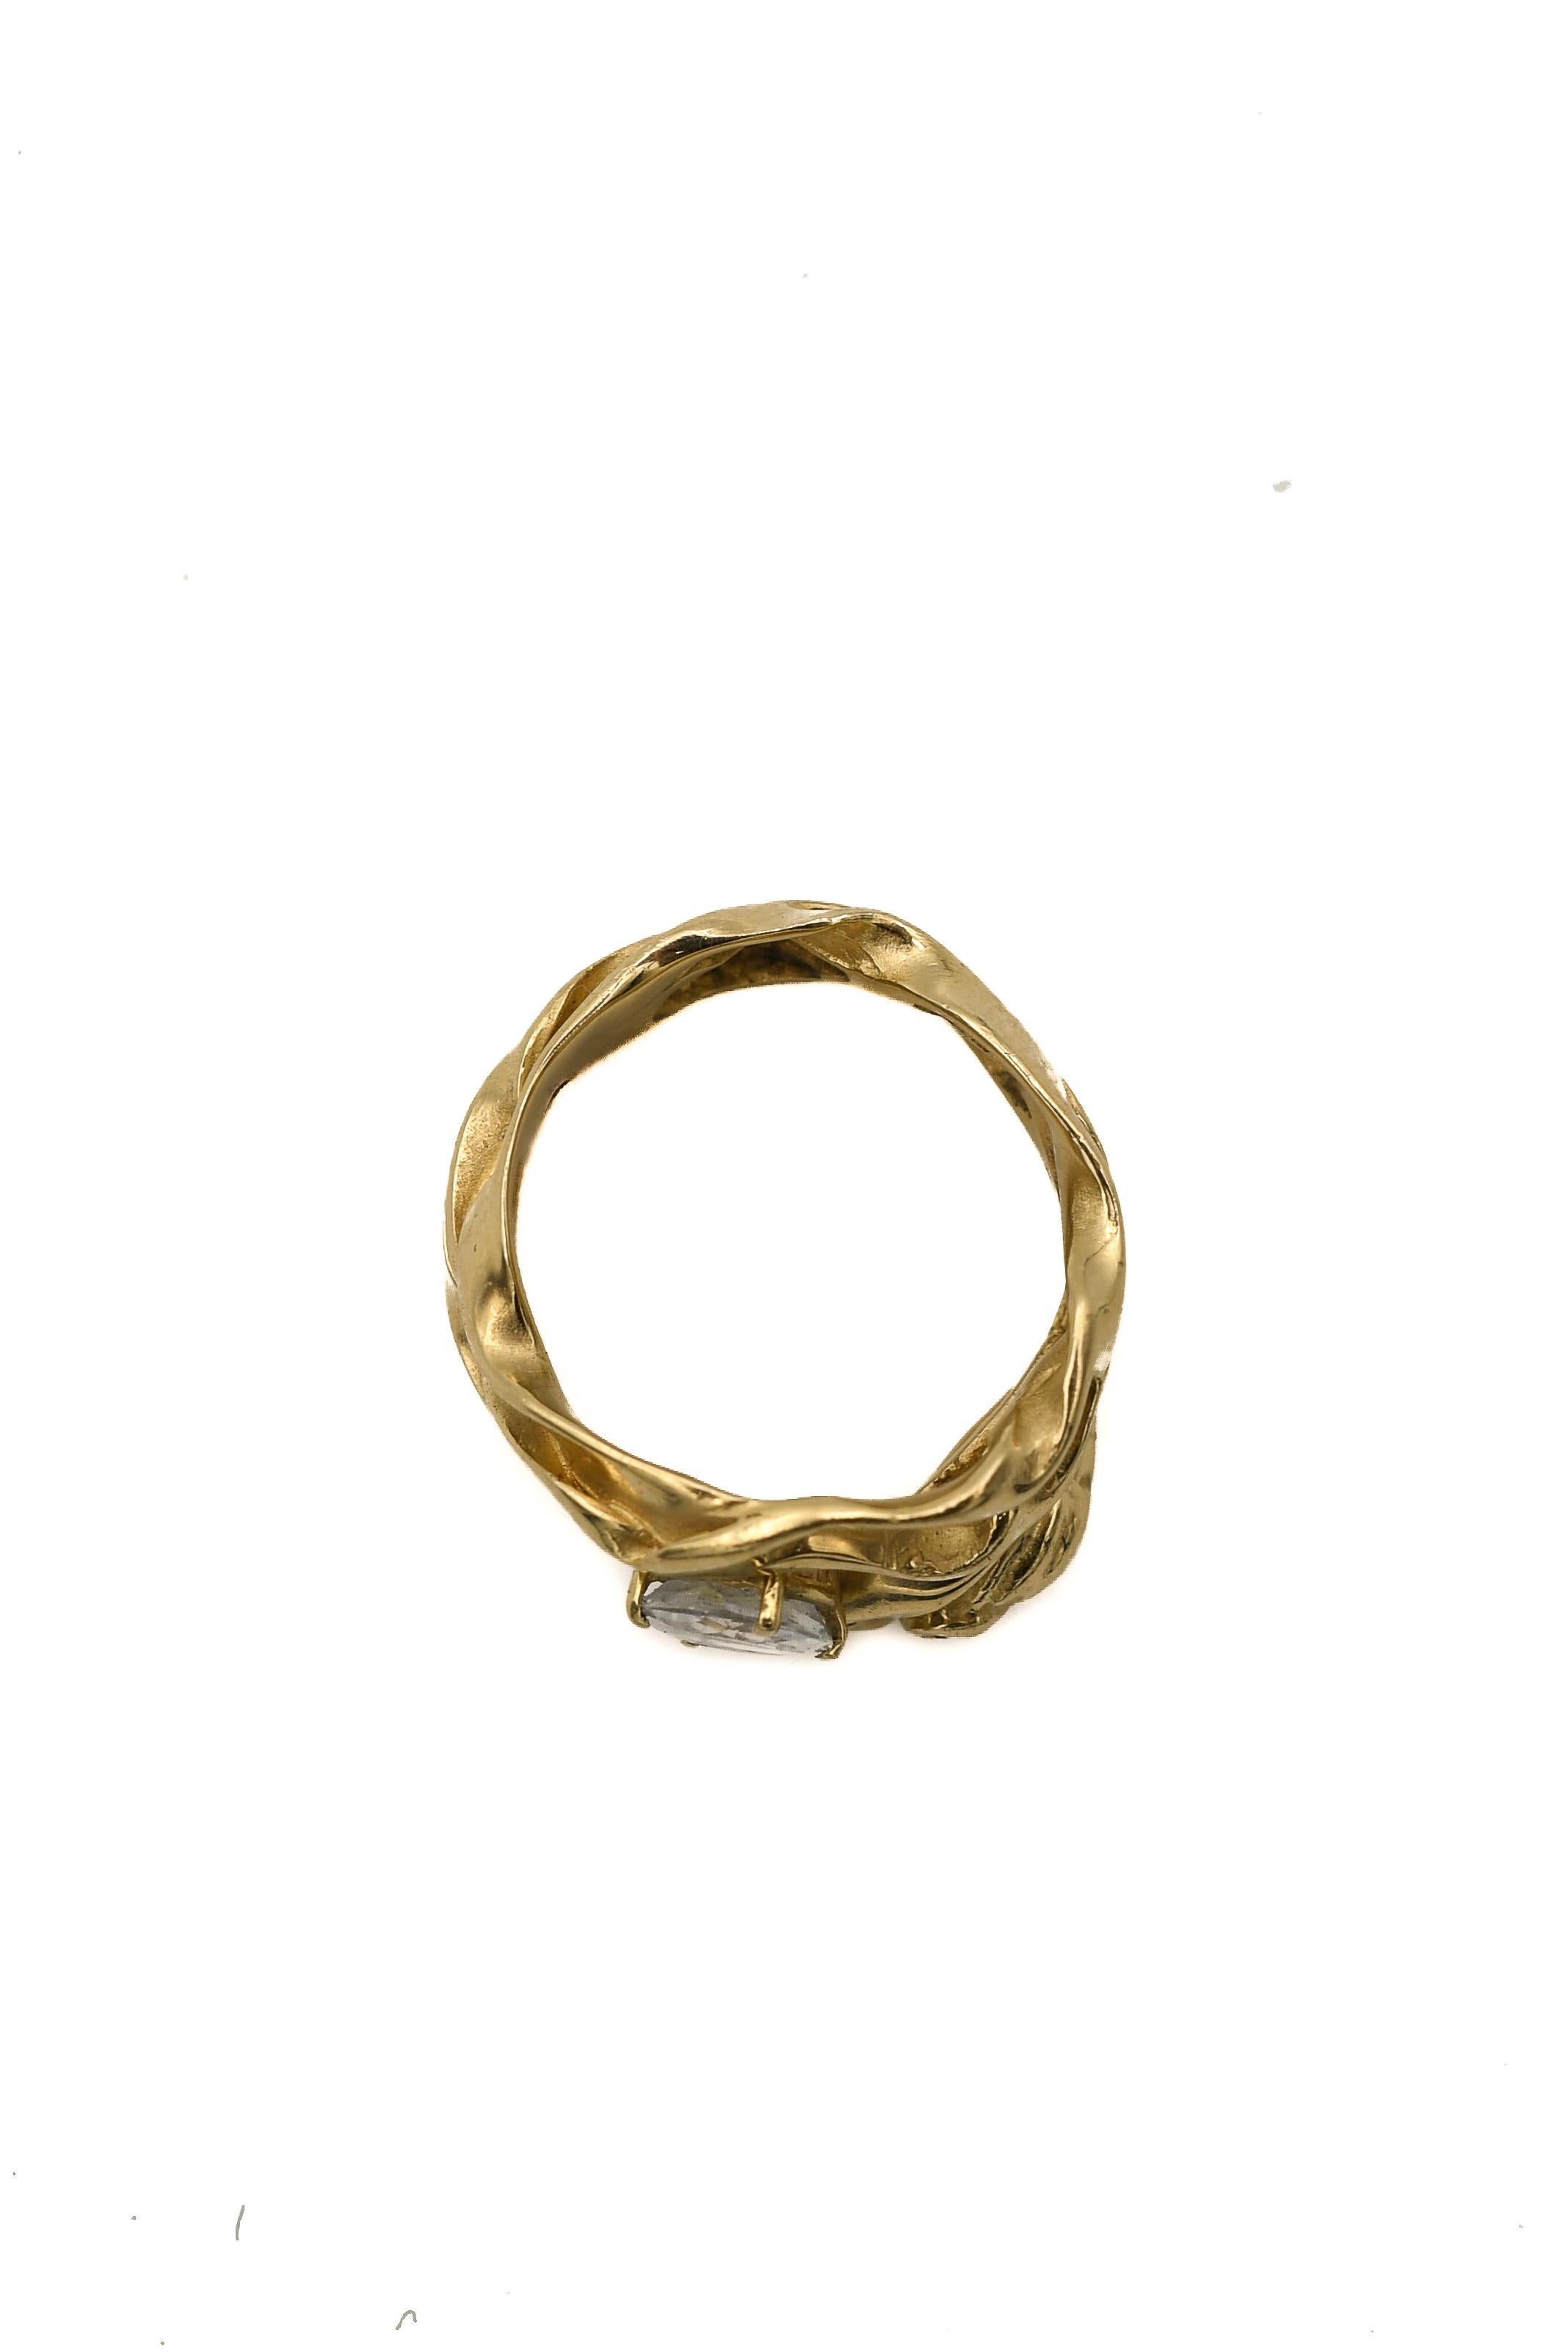 The Topaz Adella Ring is handcrafted from 14K gold and topaz in Brooklyn, New York.

Designed and created in New York by Latasha Sellers.

______________________________________

This piece is part of the NYCJW HERE WE ARE Marketplace.  HERE WE ARE